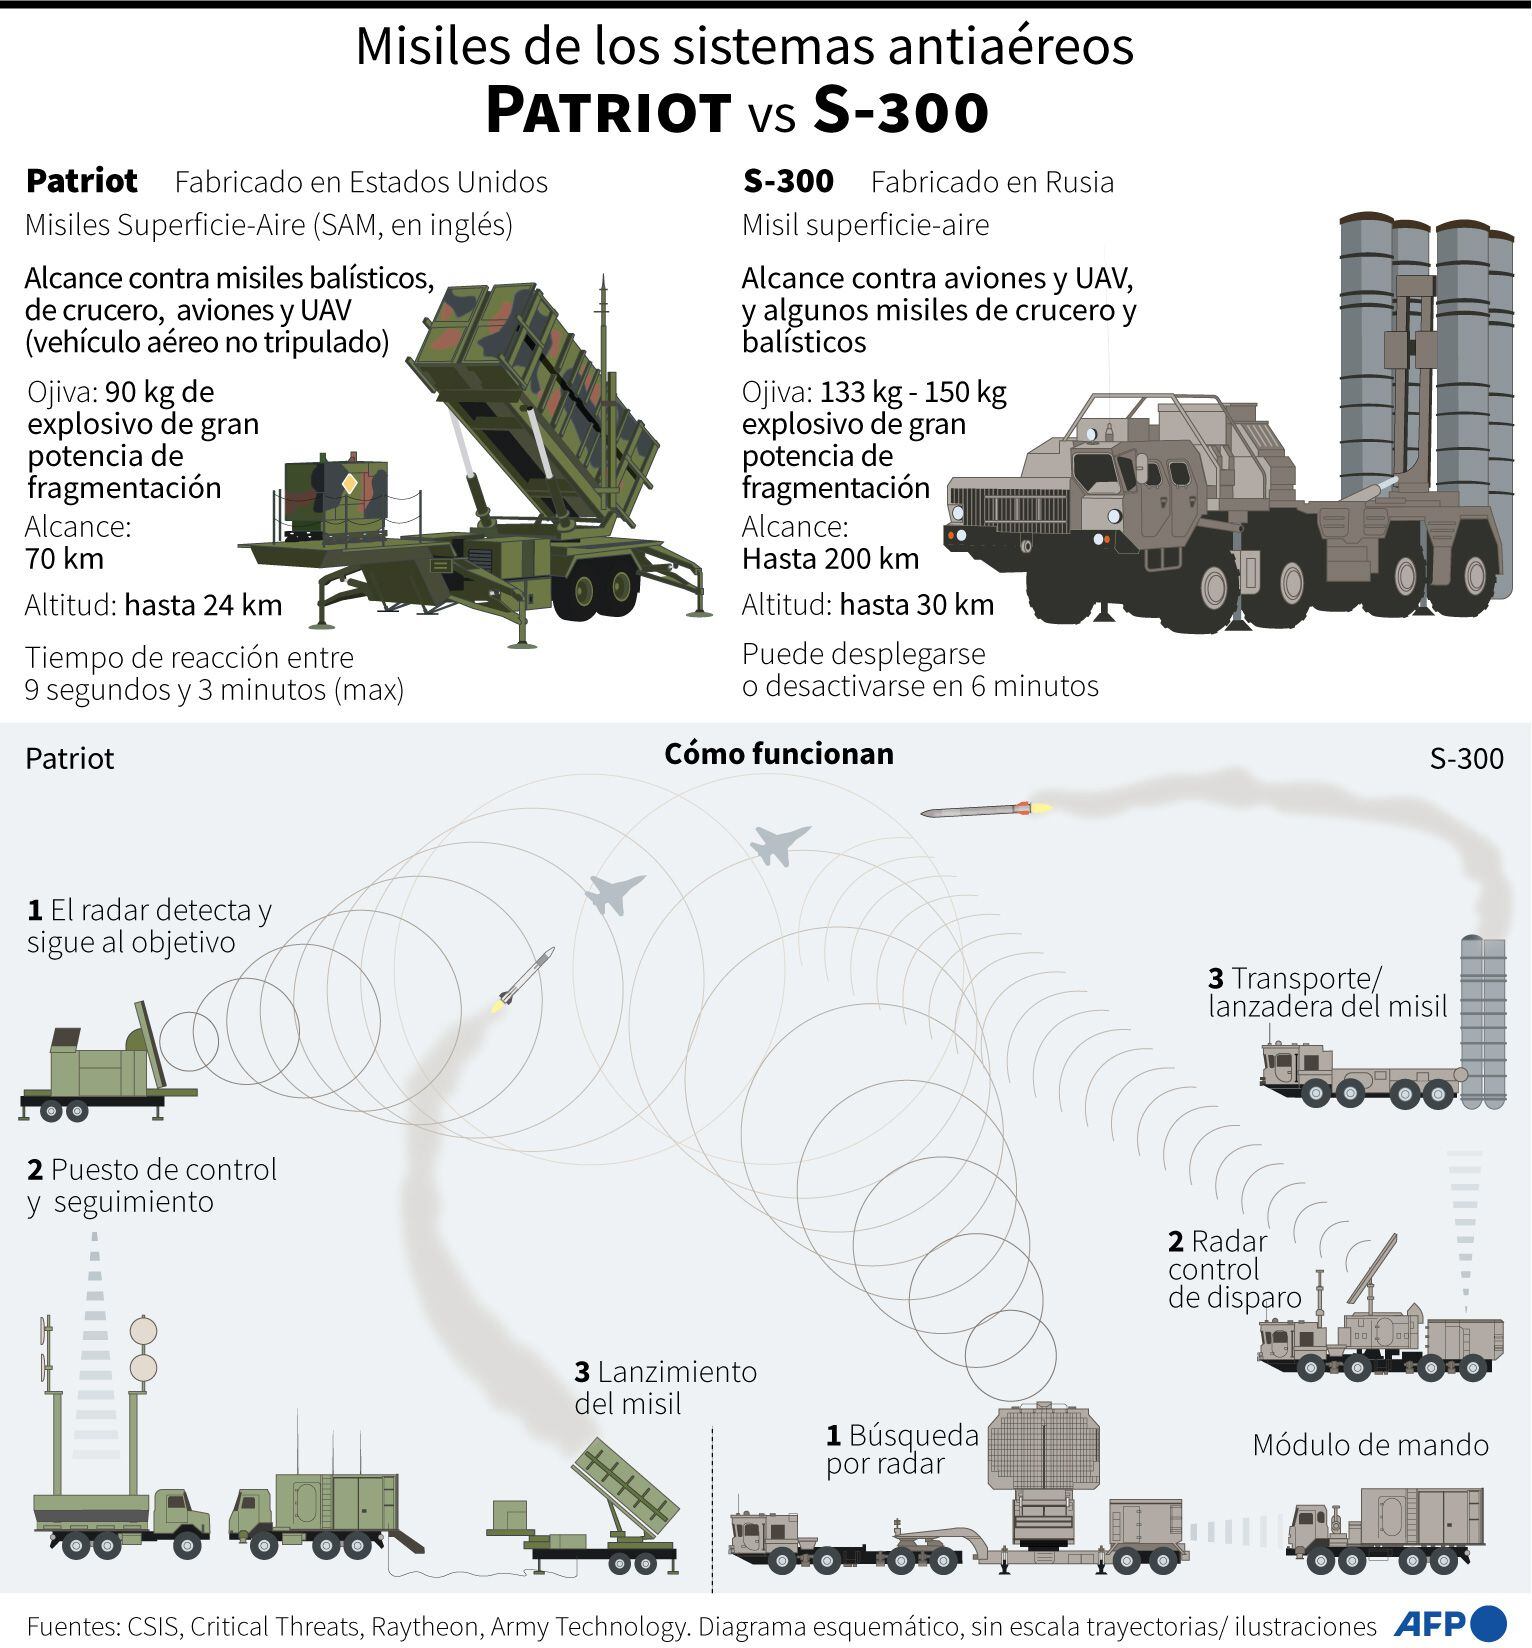 The American Patriot system compared to the Russian S-300.  (AFP).